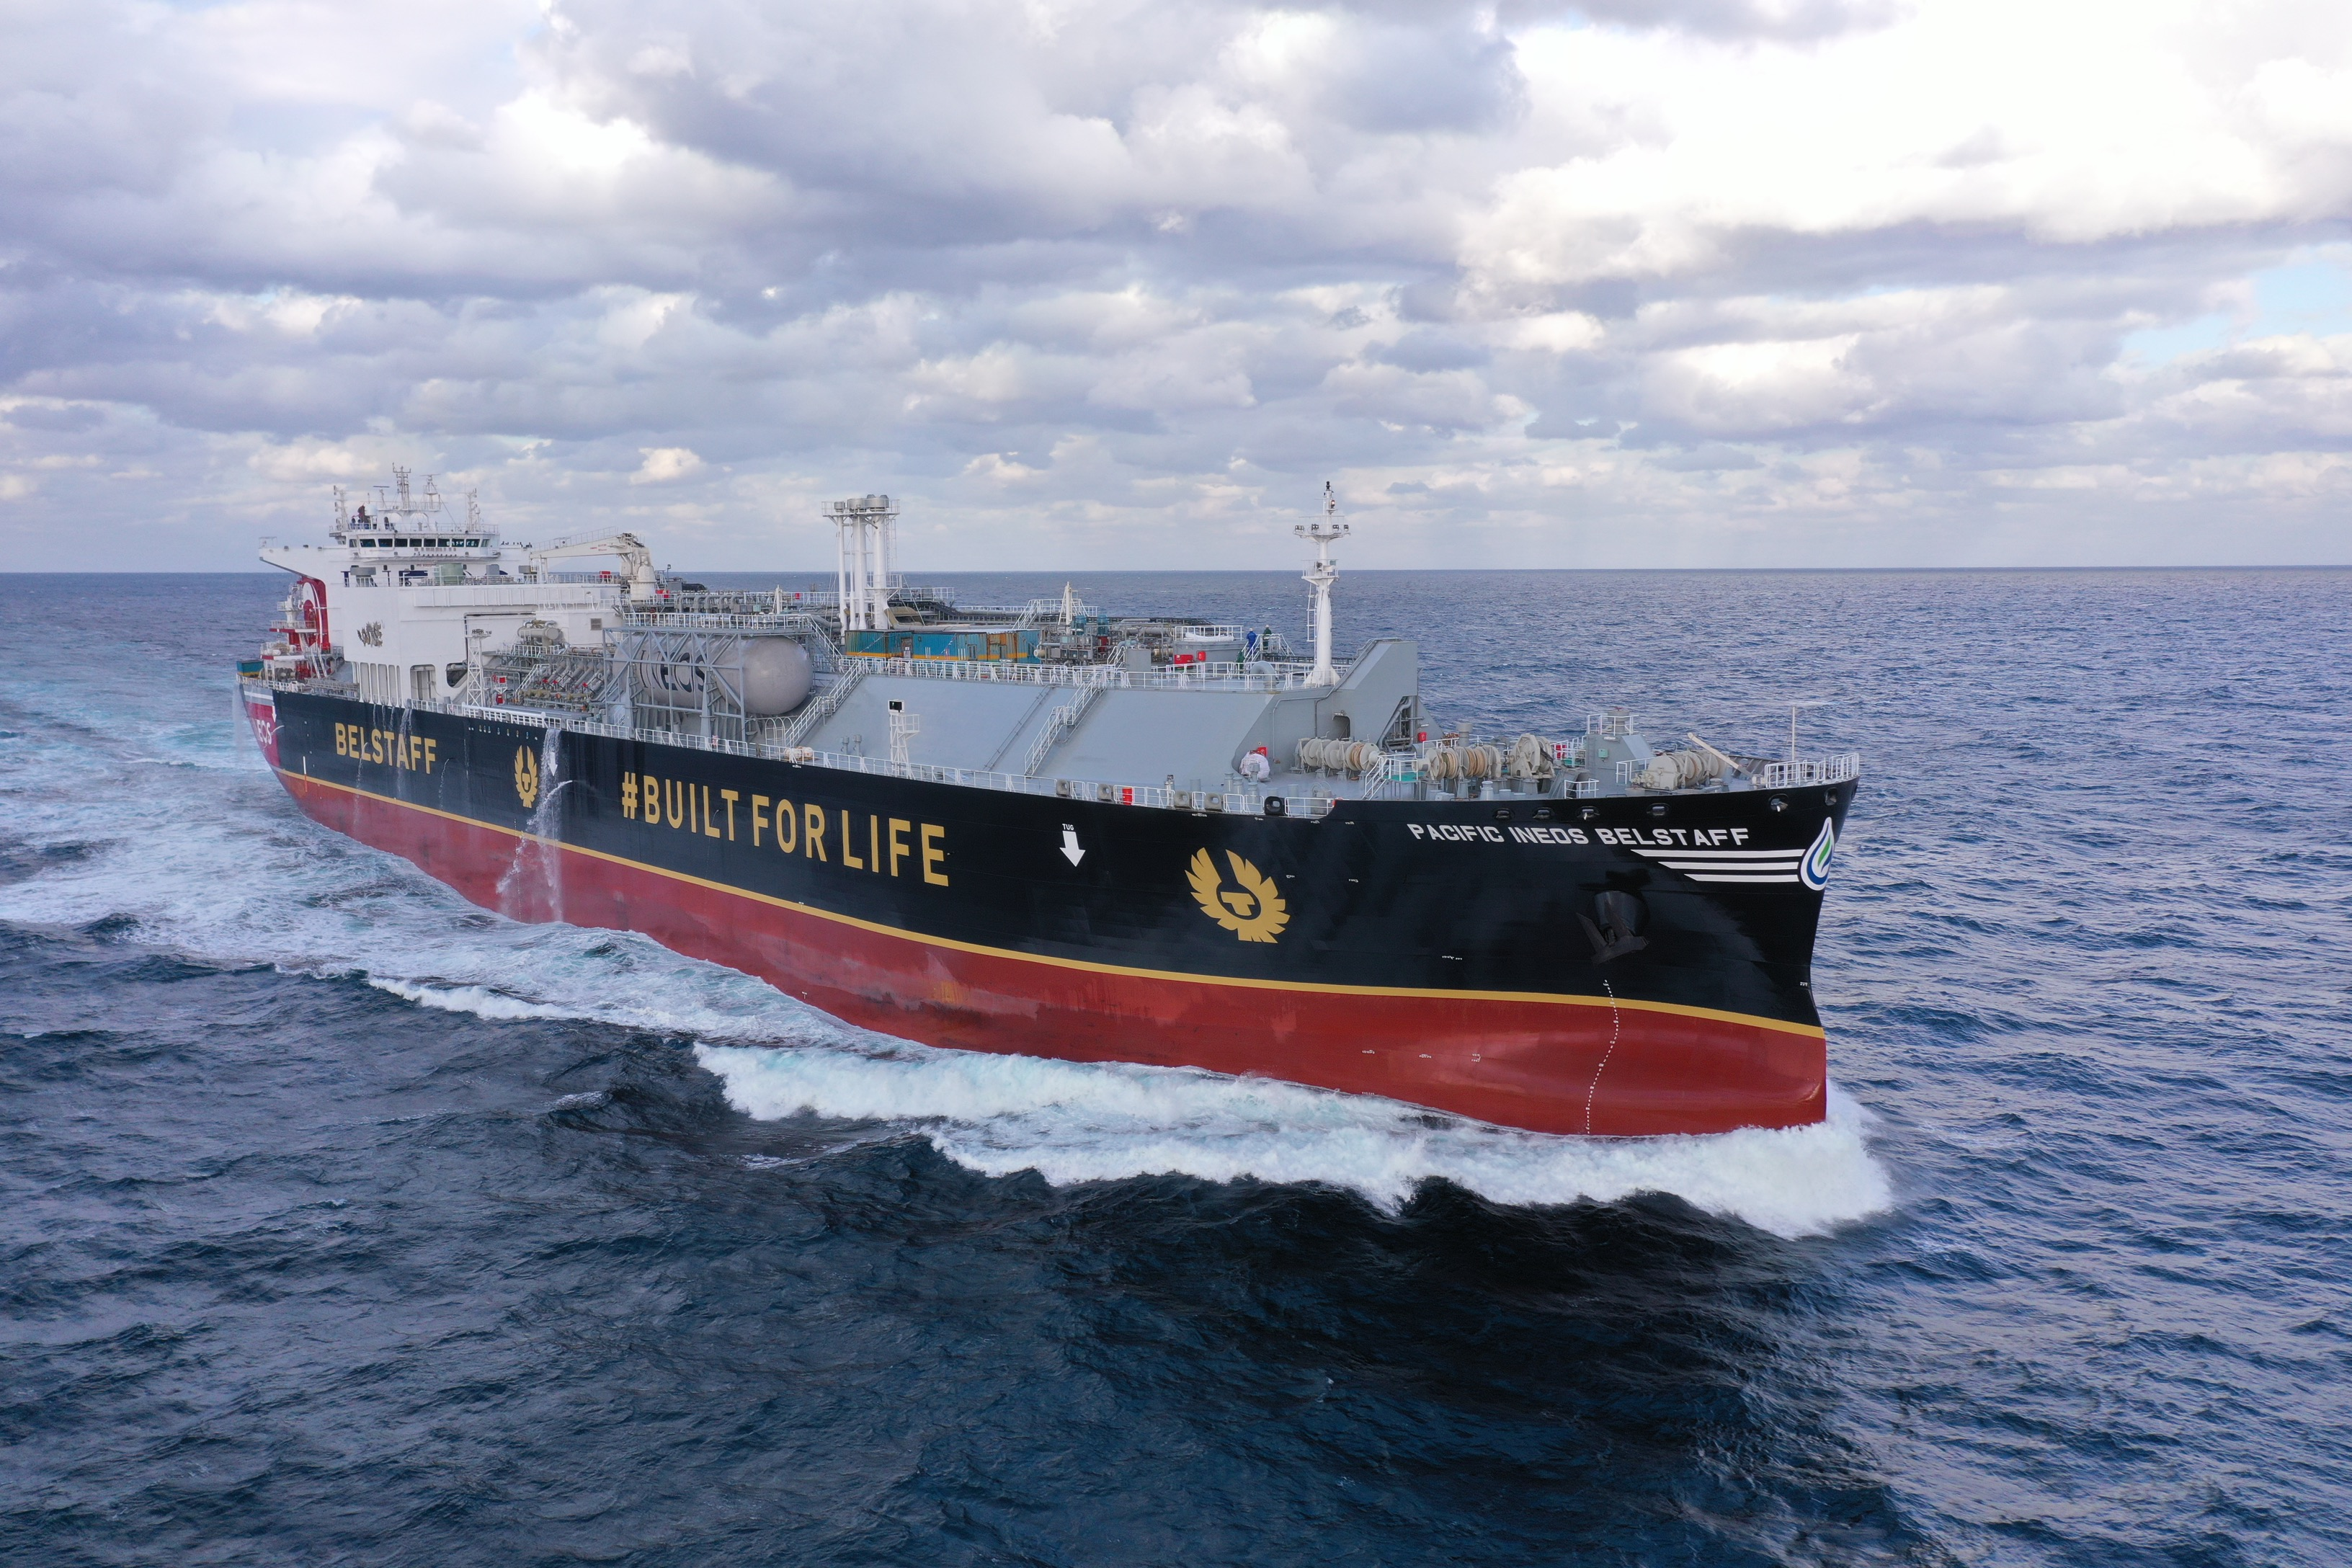 Powering the world's largest ethane carrier